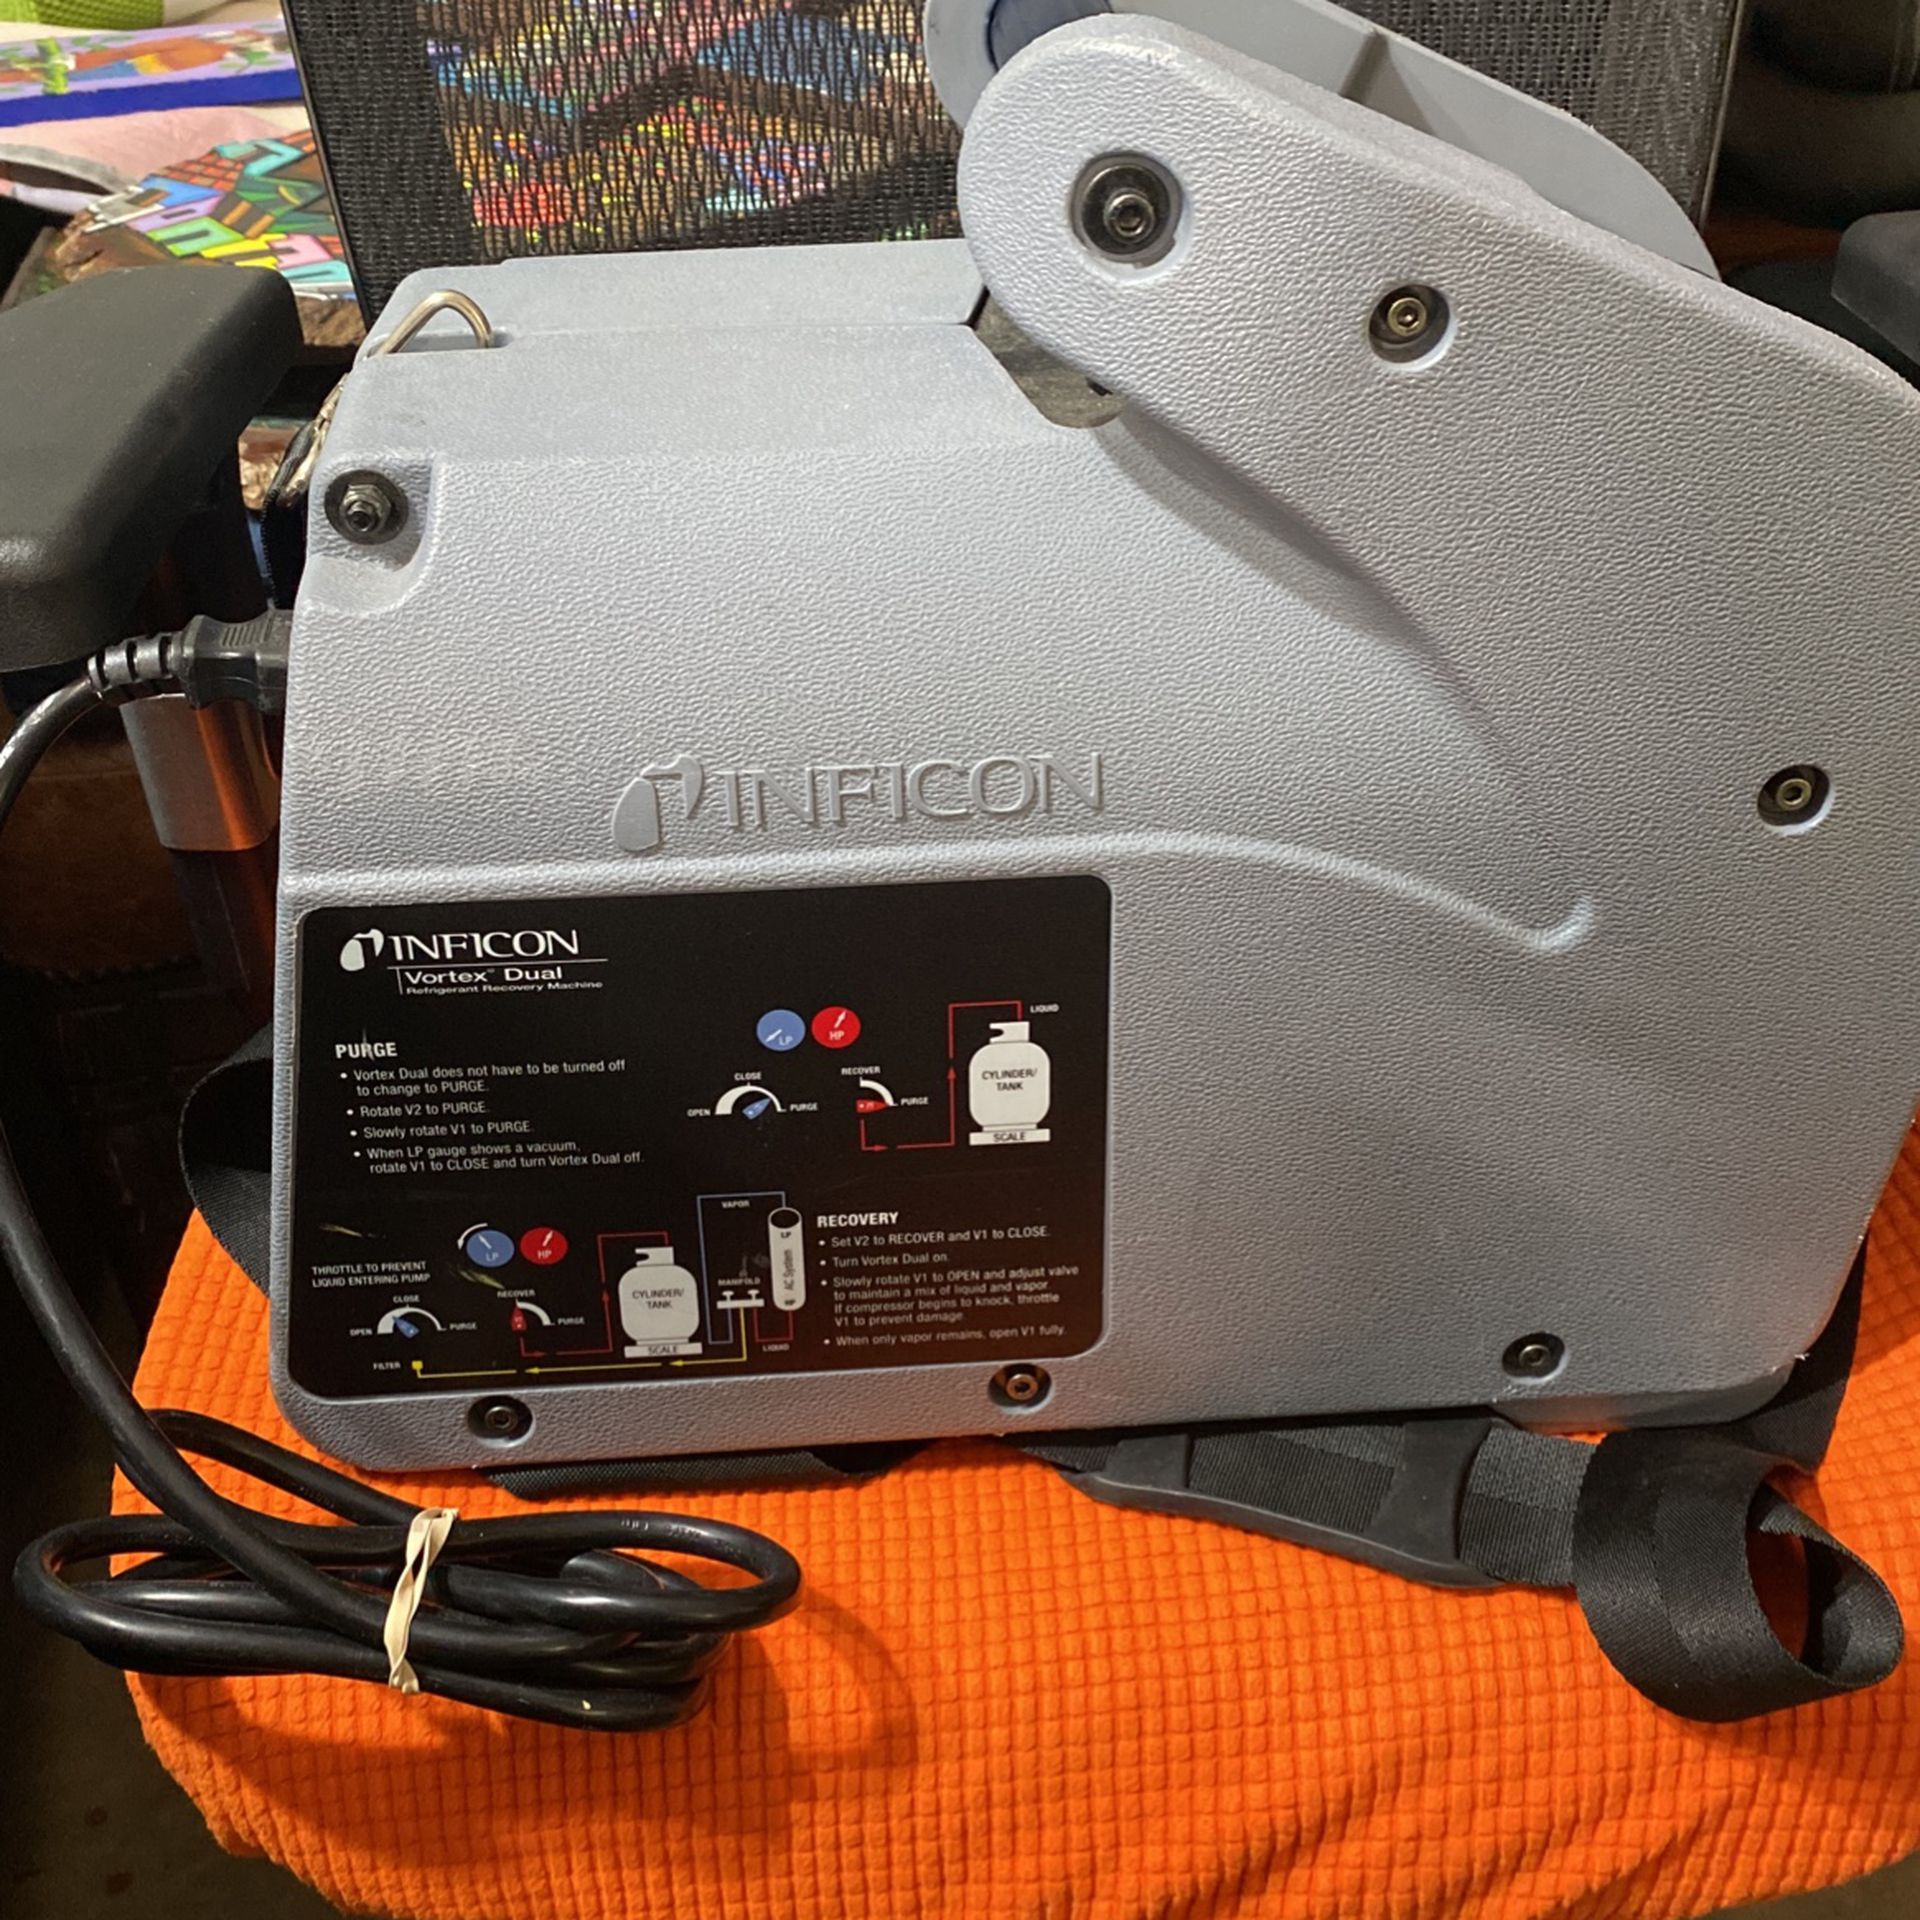 Inficon 714-202-G1 Vortex Dual Refrigerant Recovery Machine HP 120V for  Sale in Humble, TX OfferUp